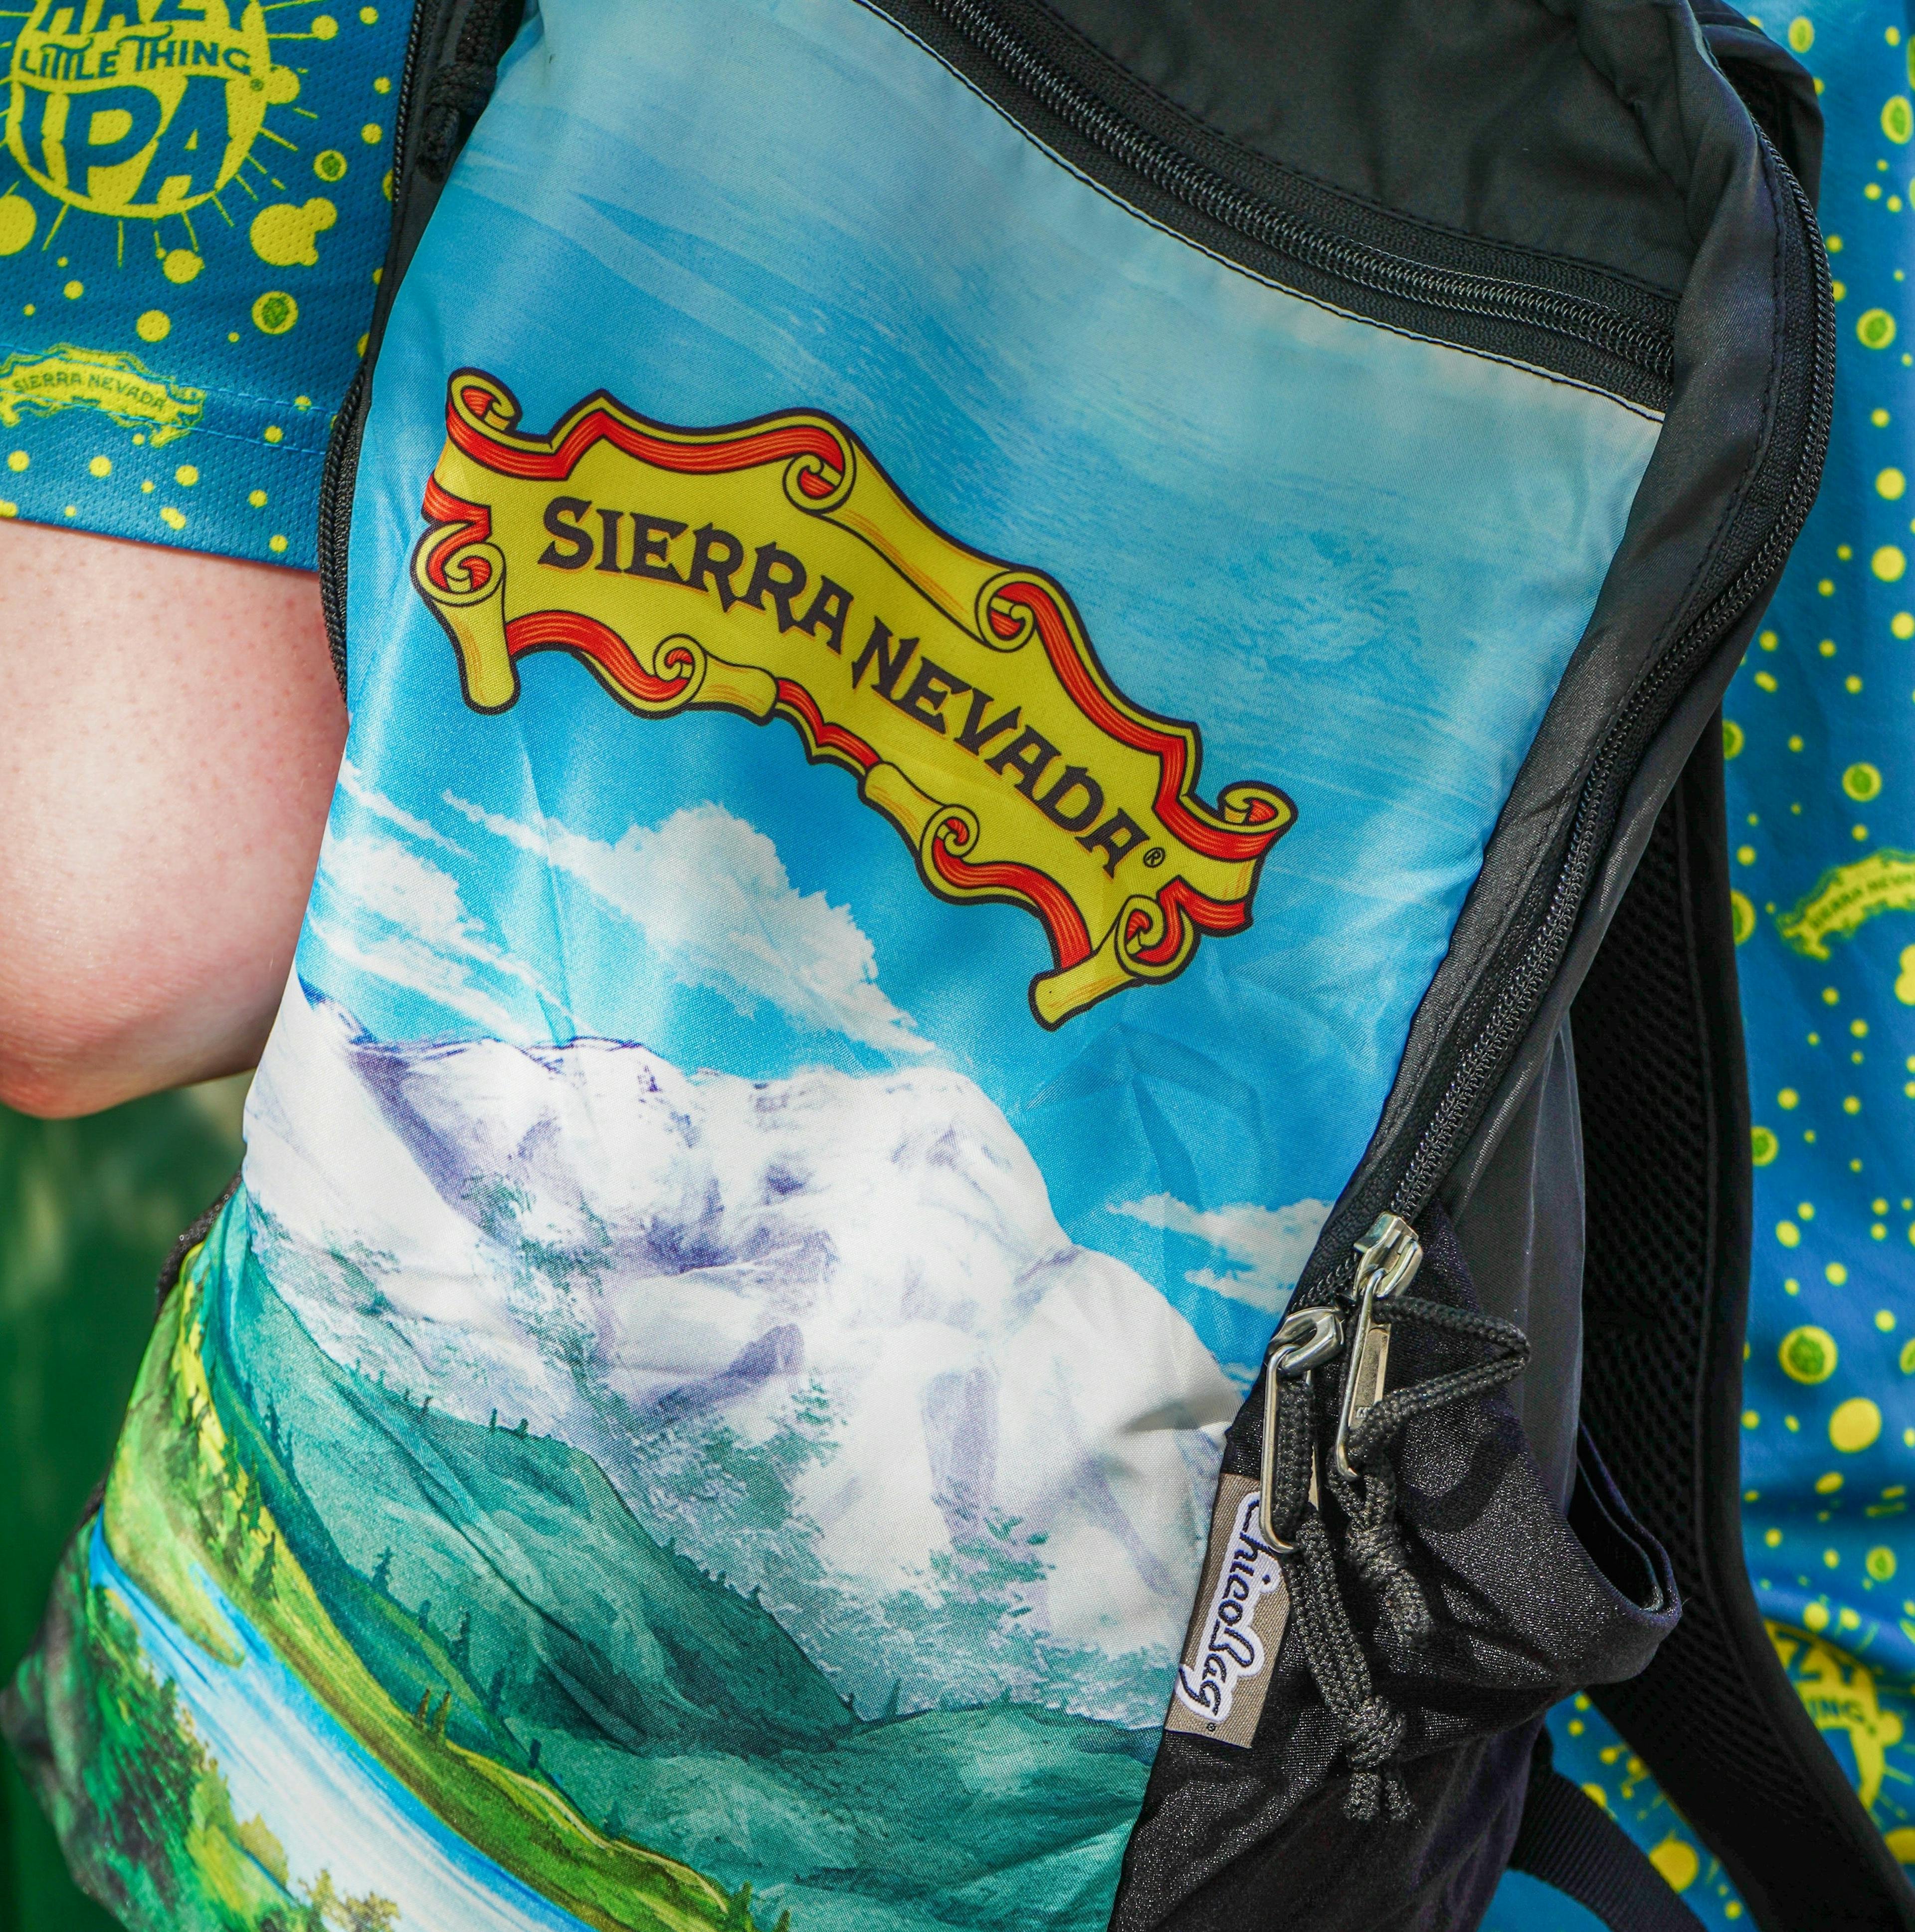 A view of the mountain scene on the Sierra Nevada X ChicoBag travel pack